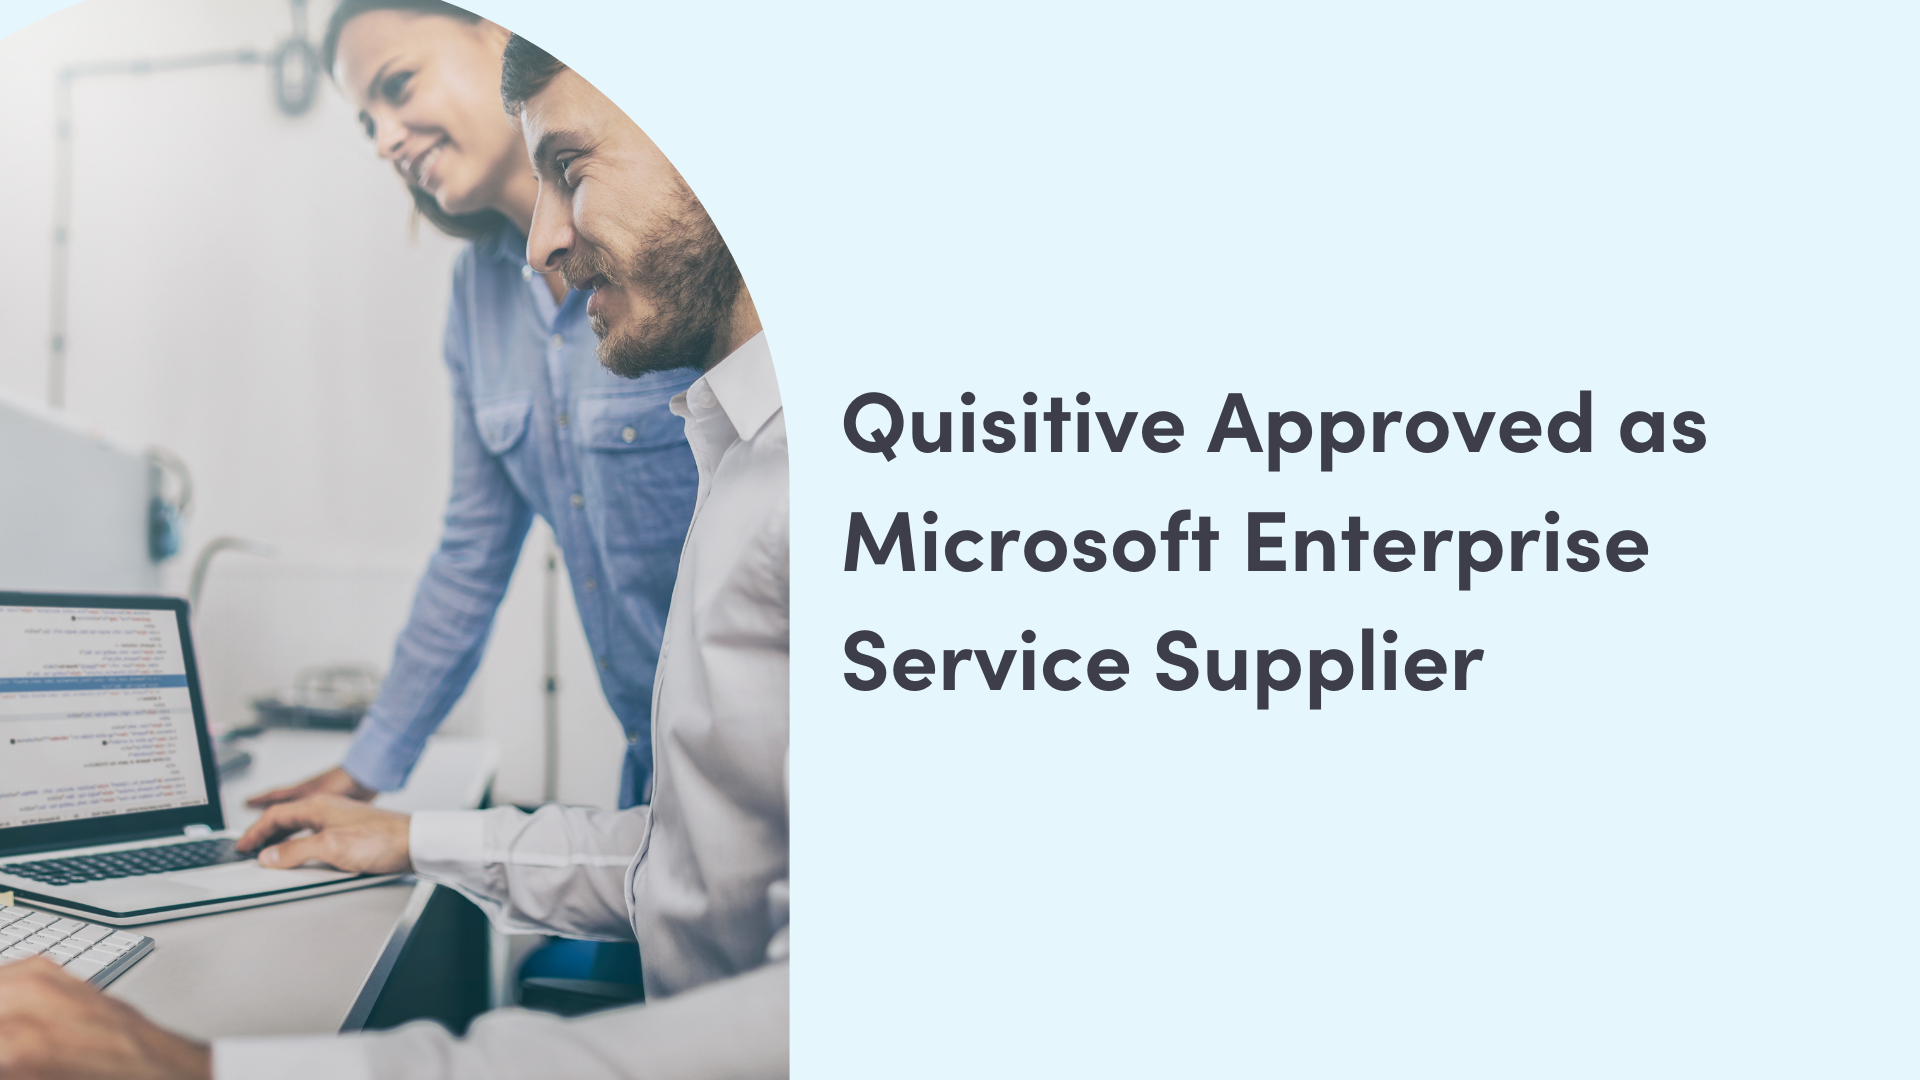 Image of man and woman collaborating at computer with text "Quisitive Approved as Microsoft Enterprise Service Supplier"